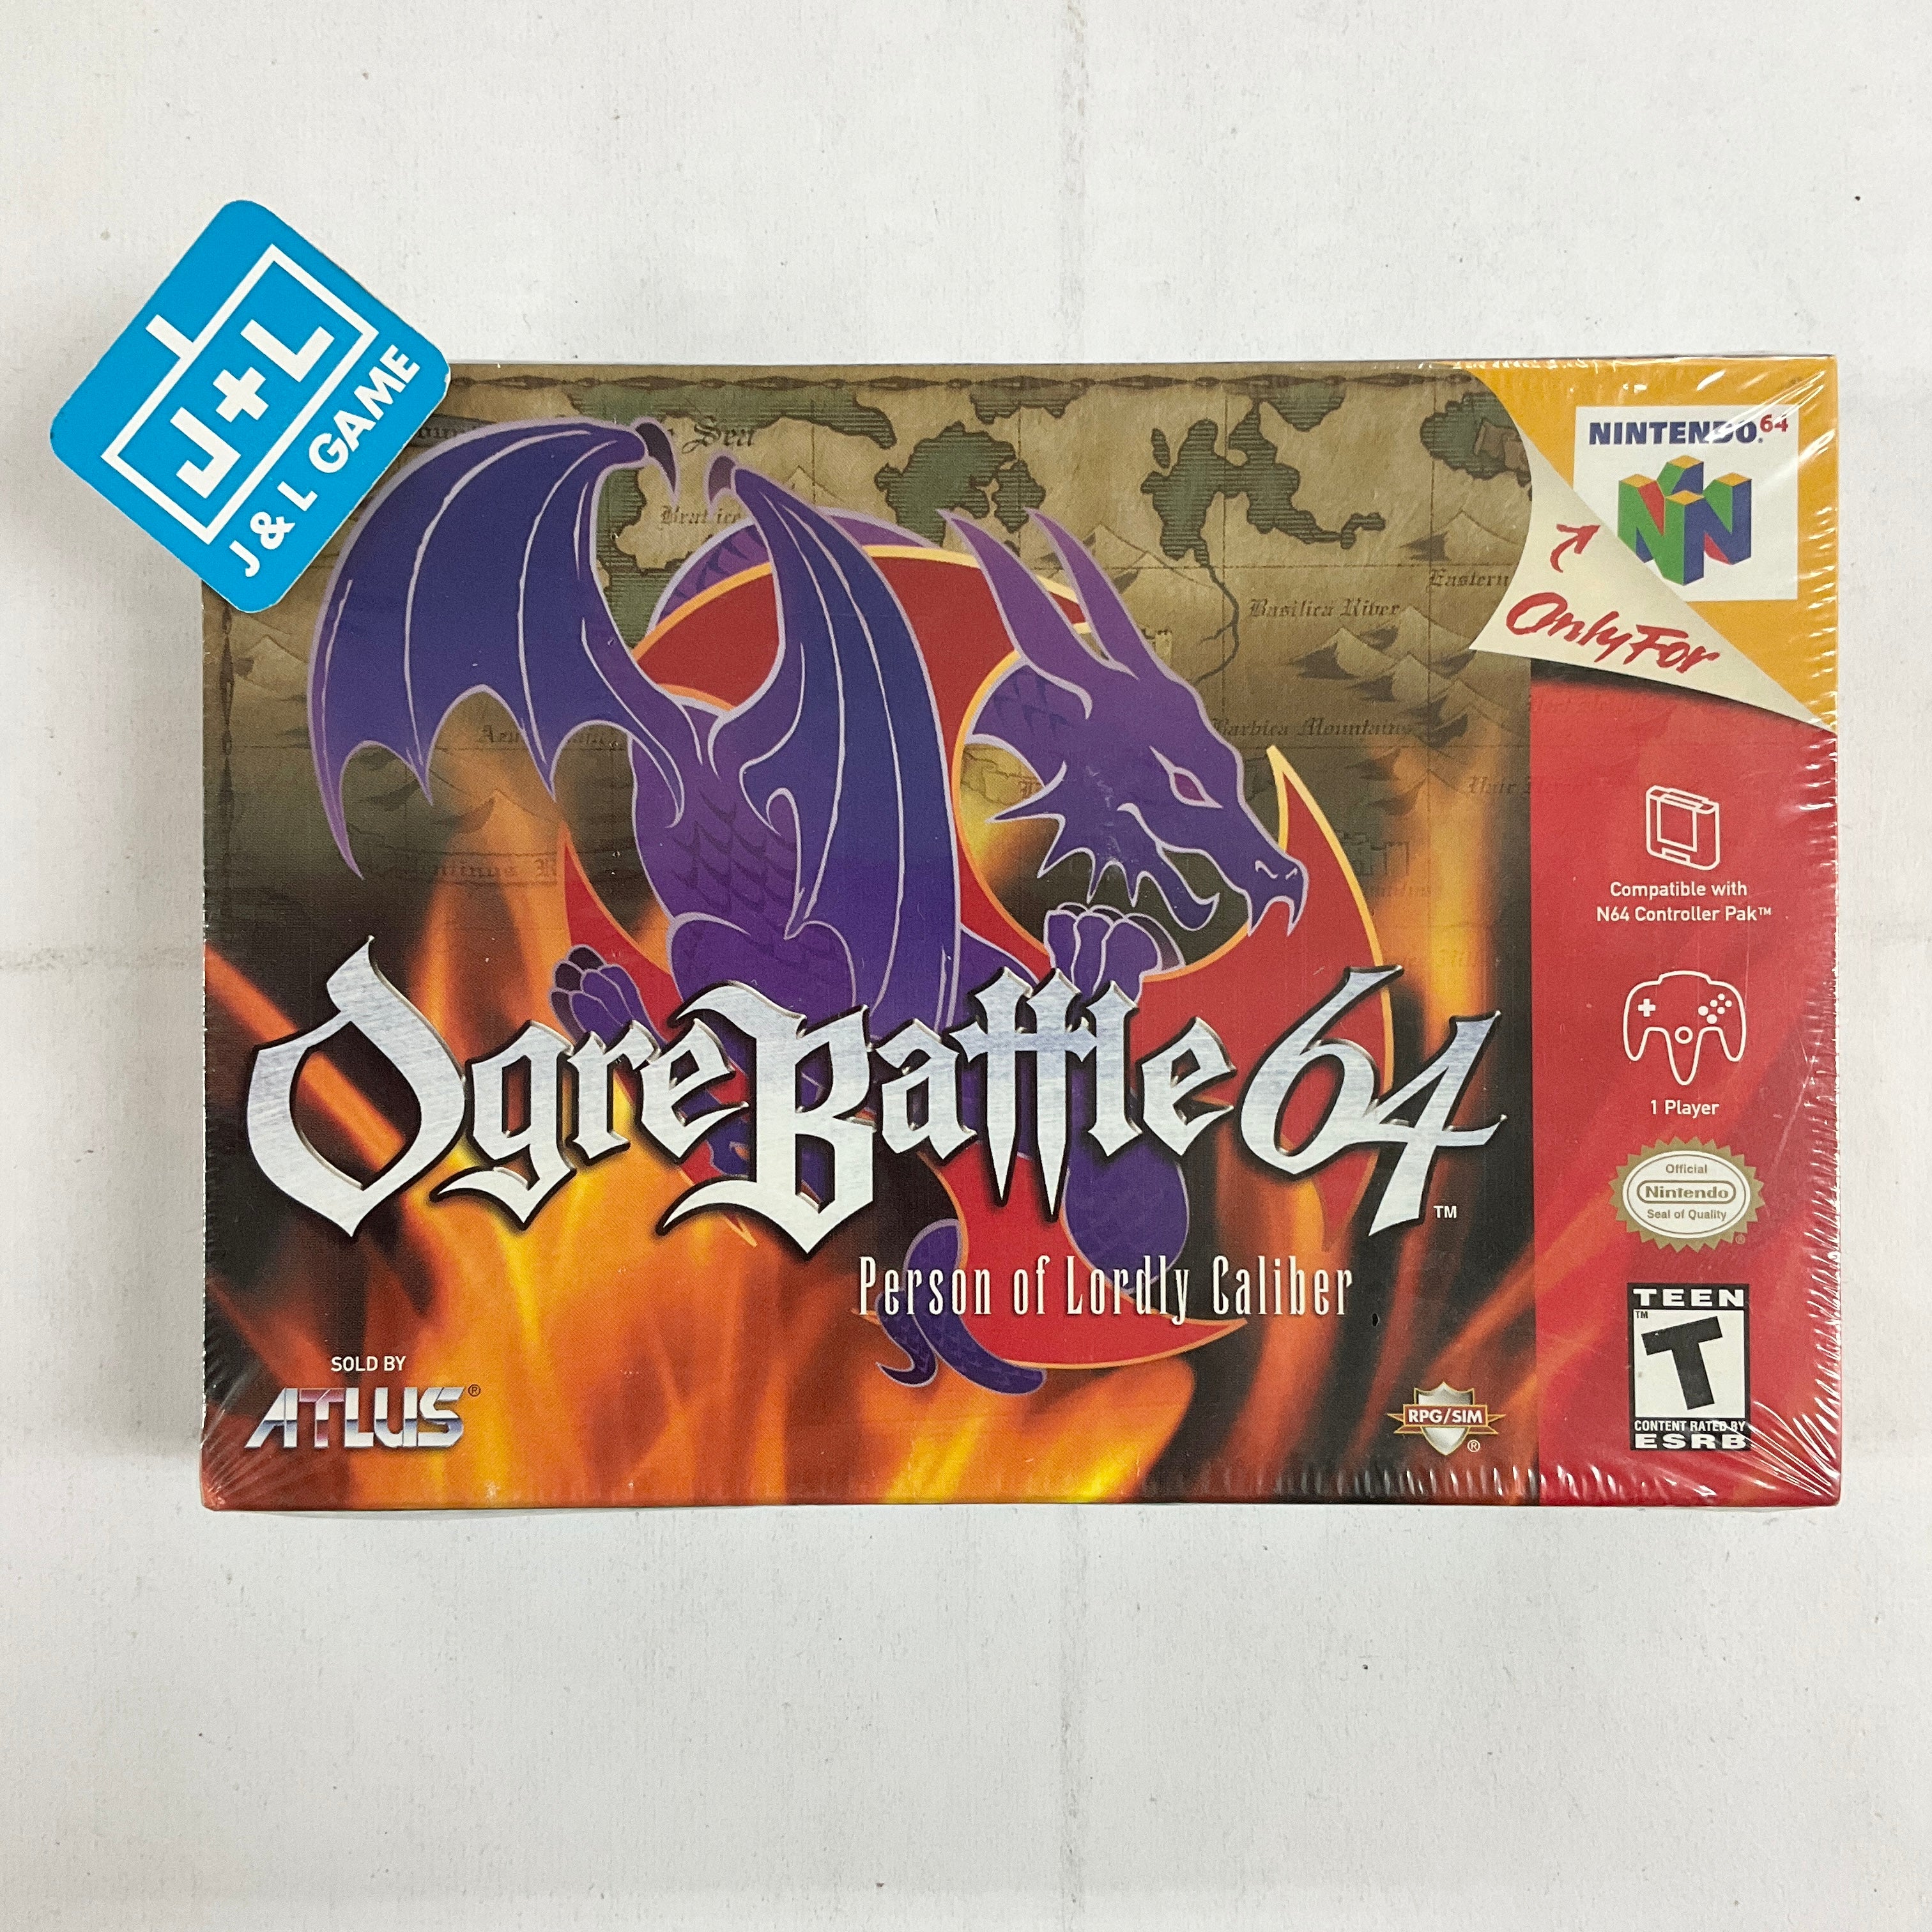 Ogre Battle 64: Person of Lordly Caliber - (N64) Nintendo 64 Video Games Atlus   